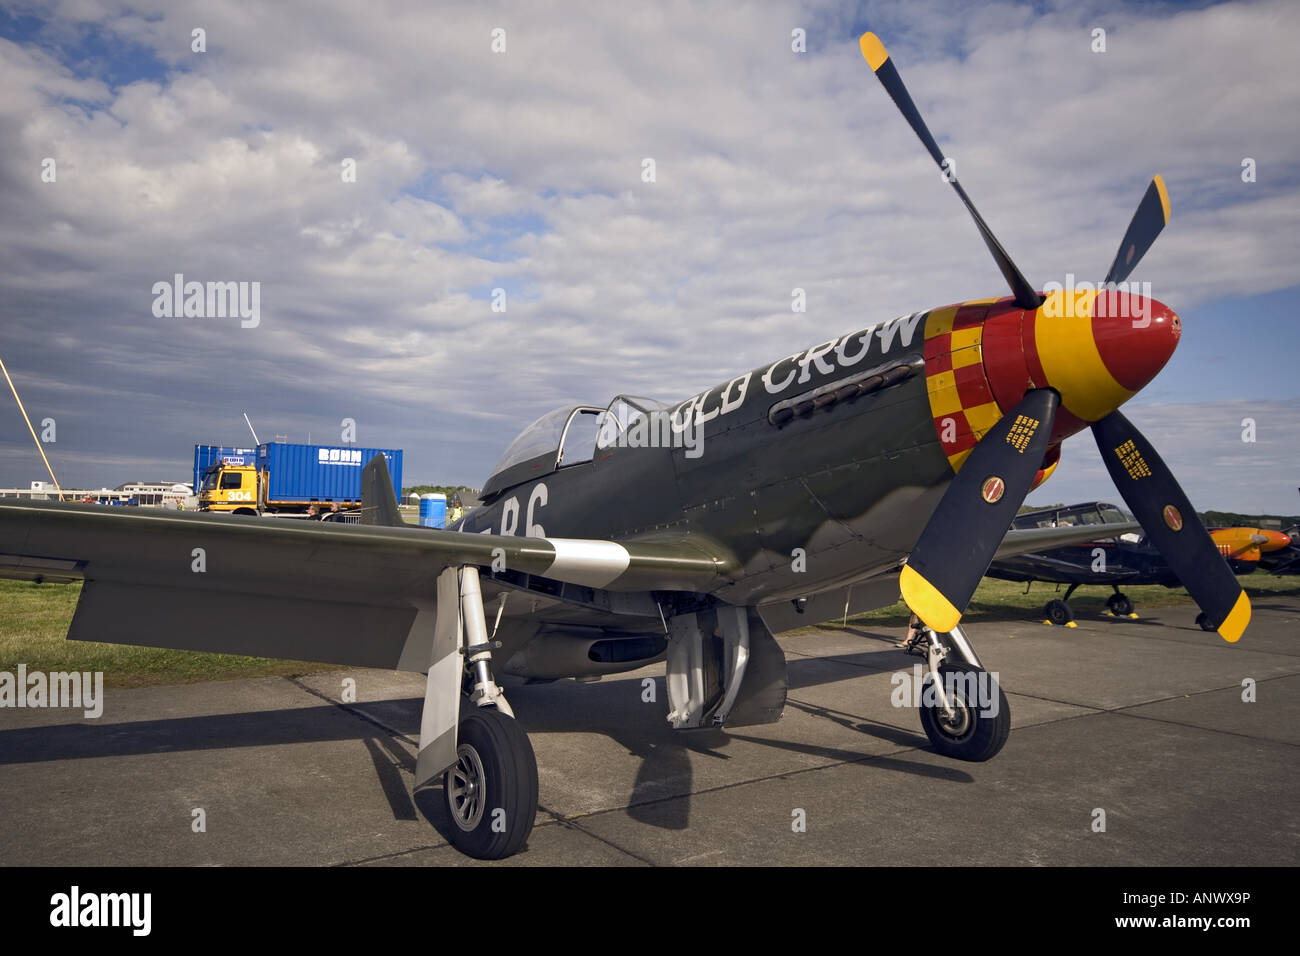 North American P-51D Mustang on the ground at Sola Airshow June 2007, Norway Stock Photo